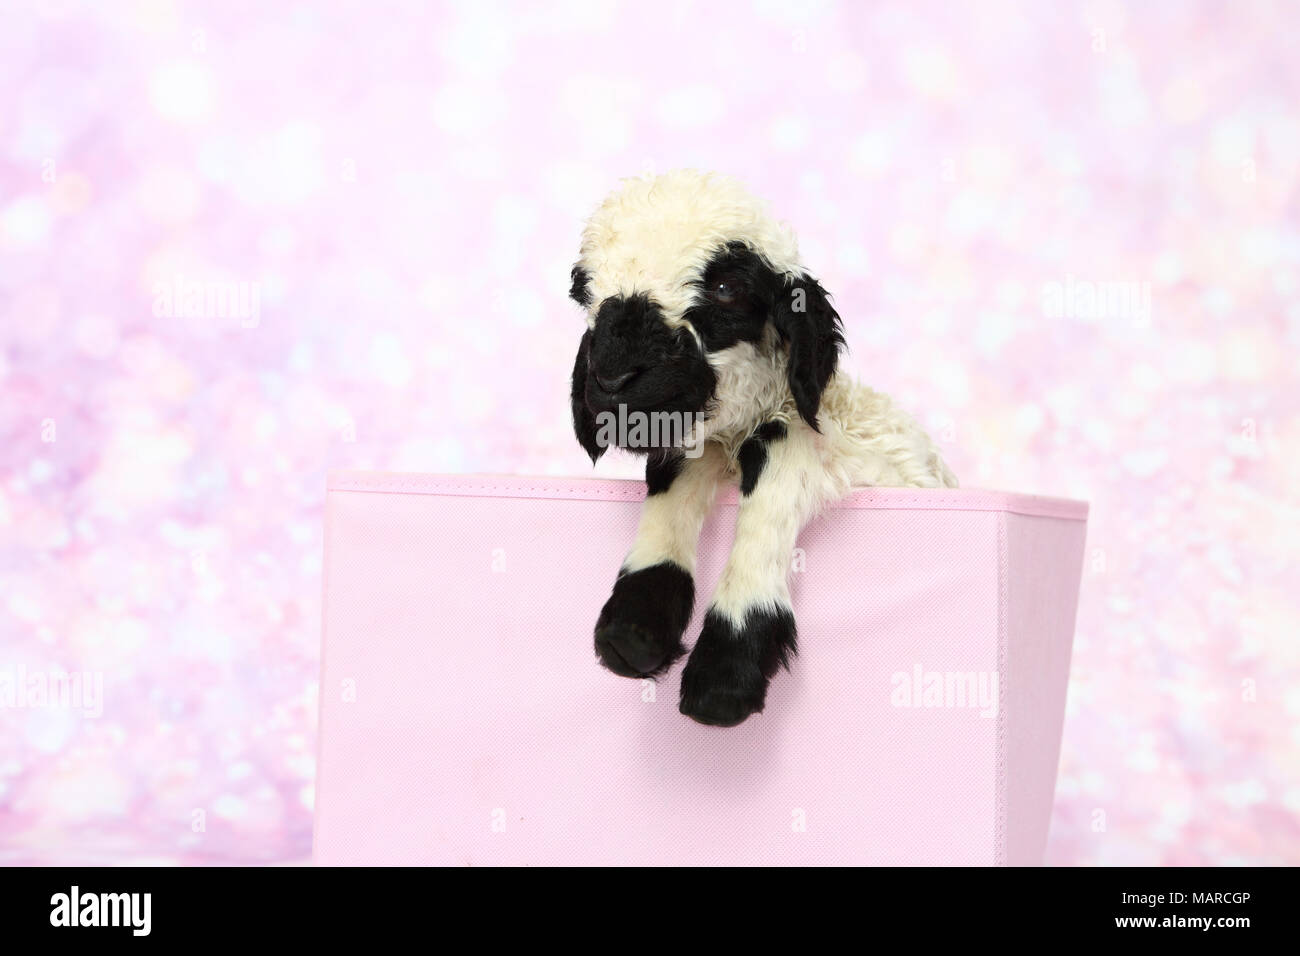 Valais Blacknose Sheep. Lamb (5 days old) in a pink box. Studio picture against a pink background. Germany Stock Photo